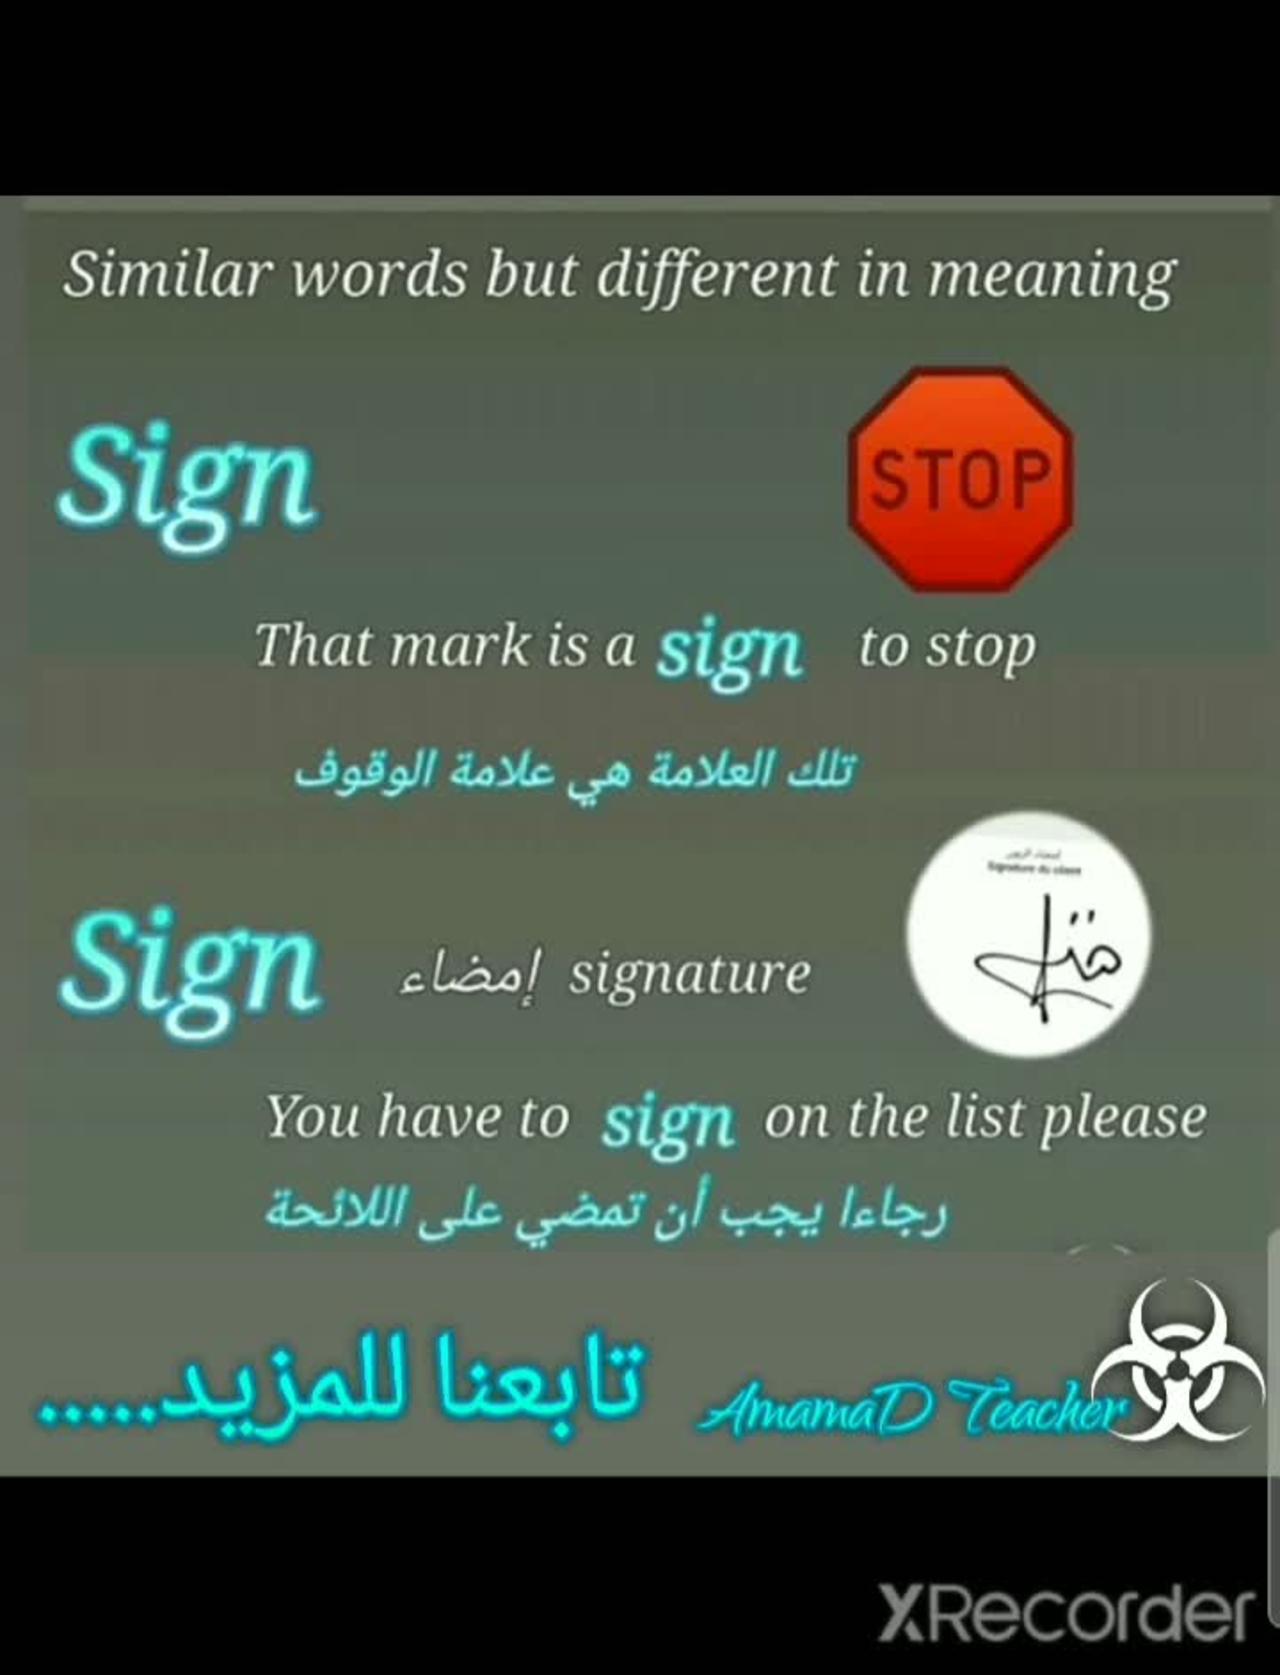 Similar words but different in meaning